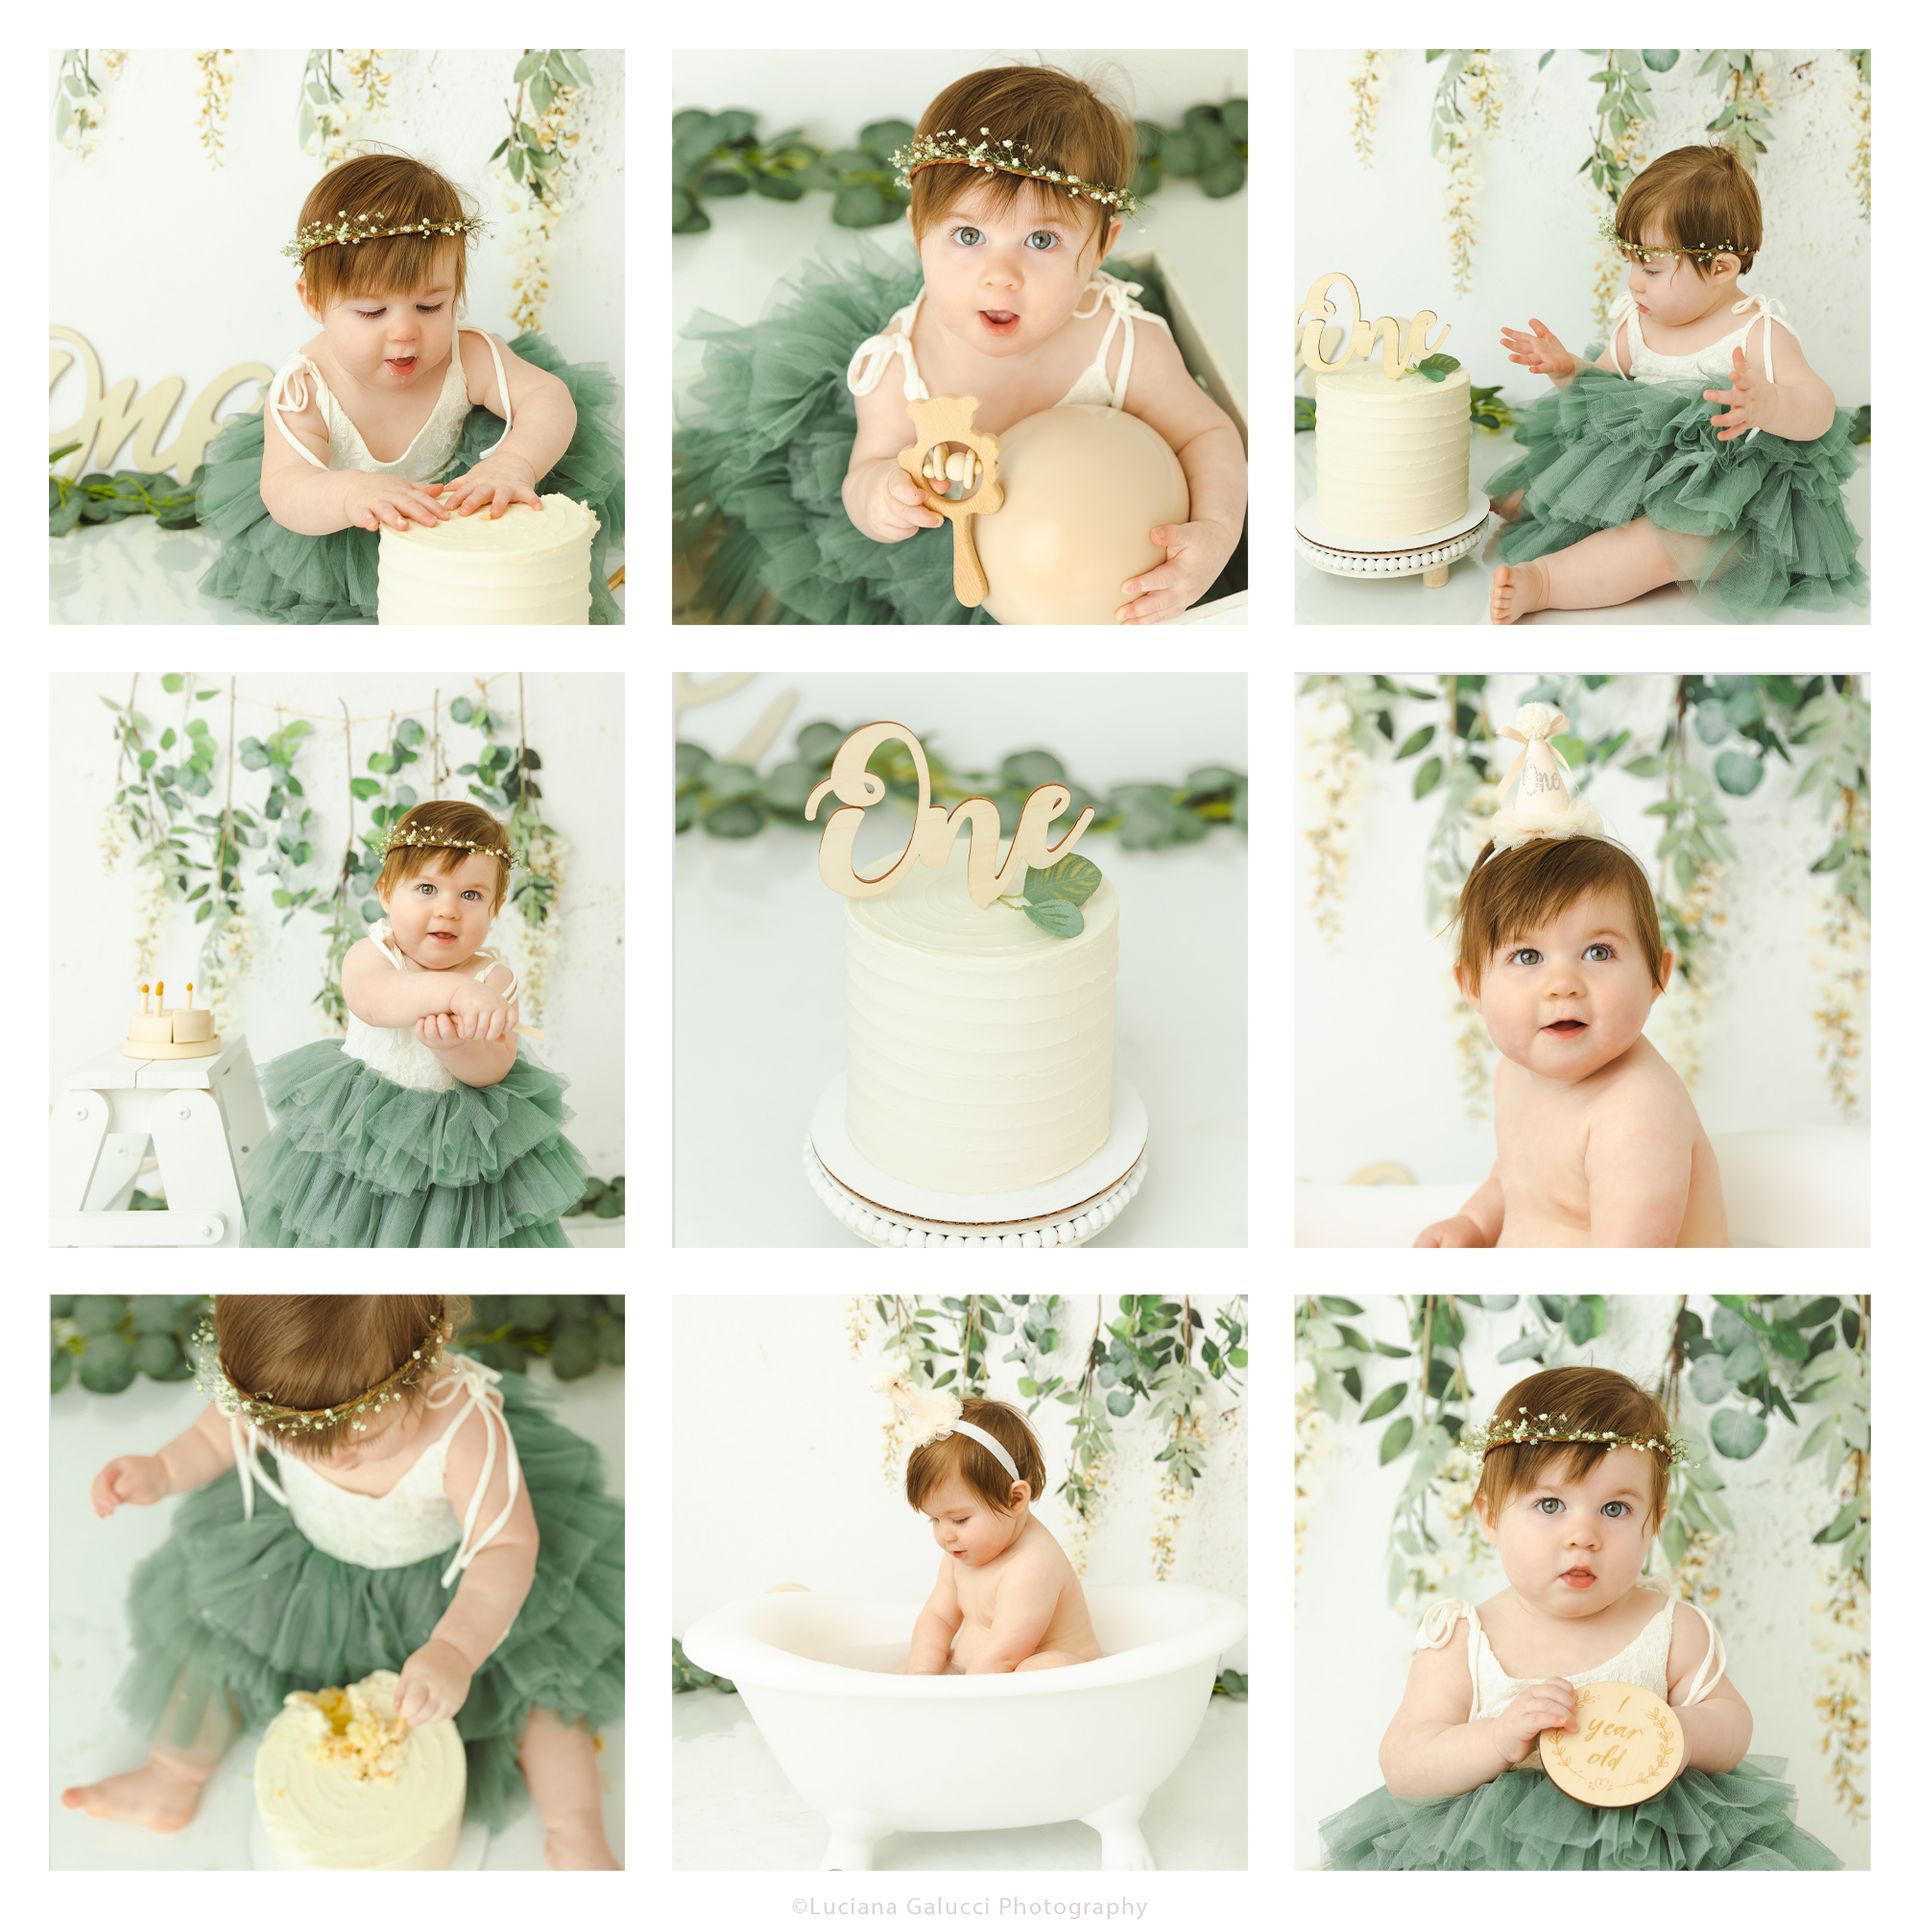 Greenery Floral Garland Cake Smash Themed Session by Luciana Galucci Photography